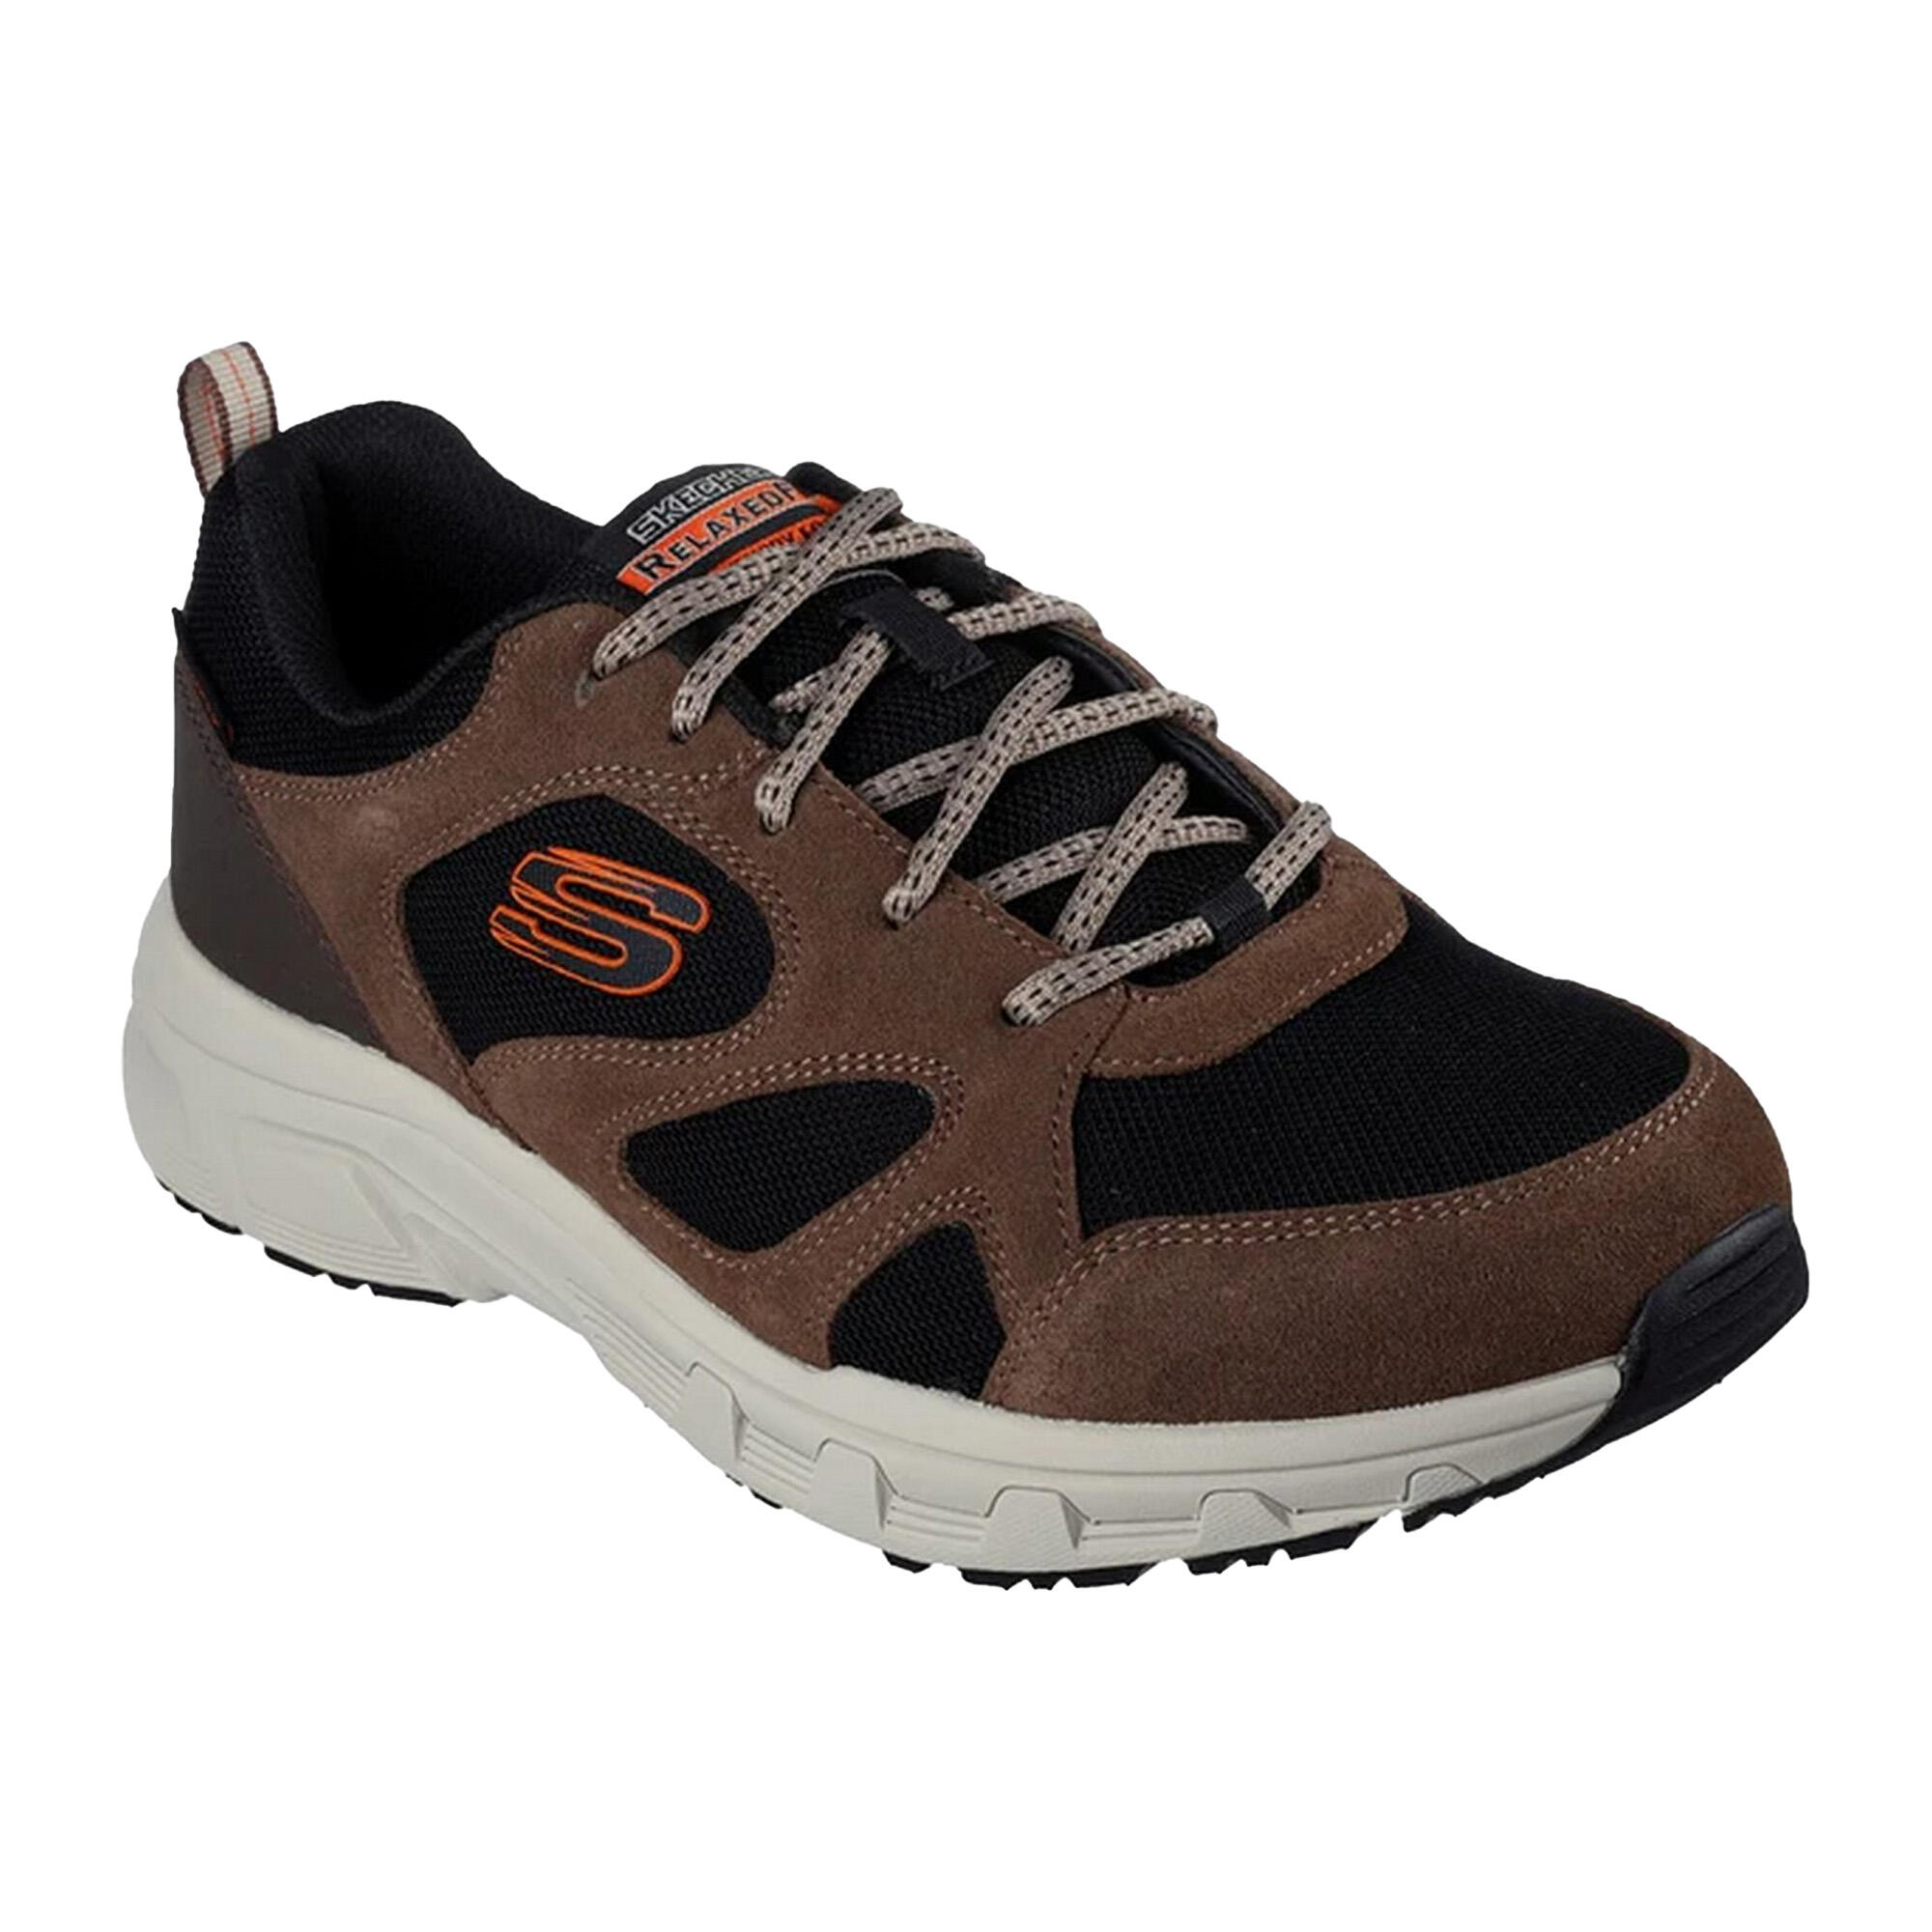 SKECHERS Mens Oak Canyon Sunfair Suede Relaxed Fit Trainers (Brown/Black)